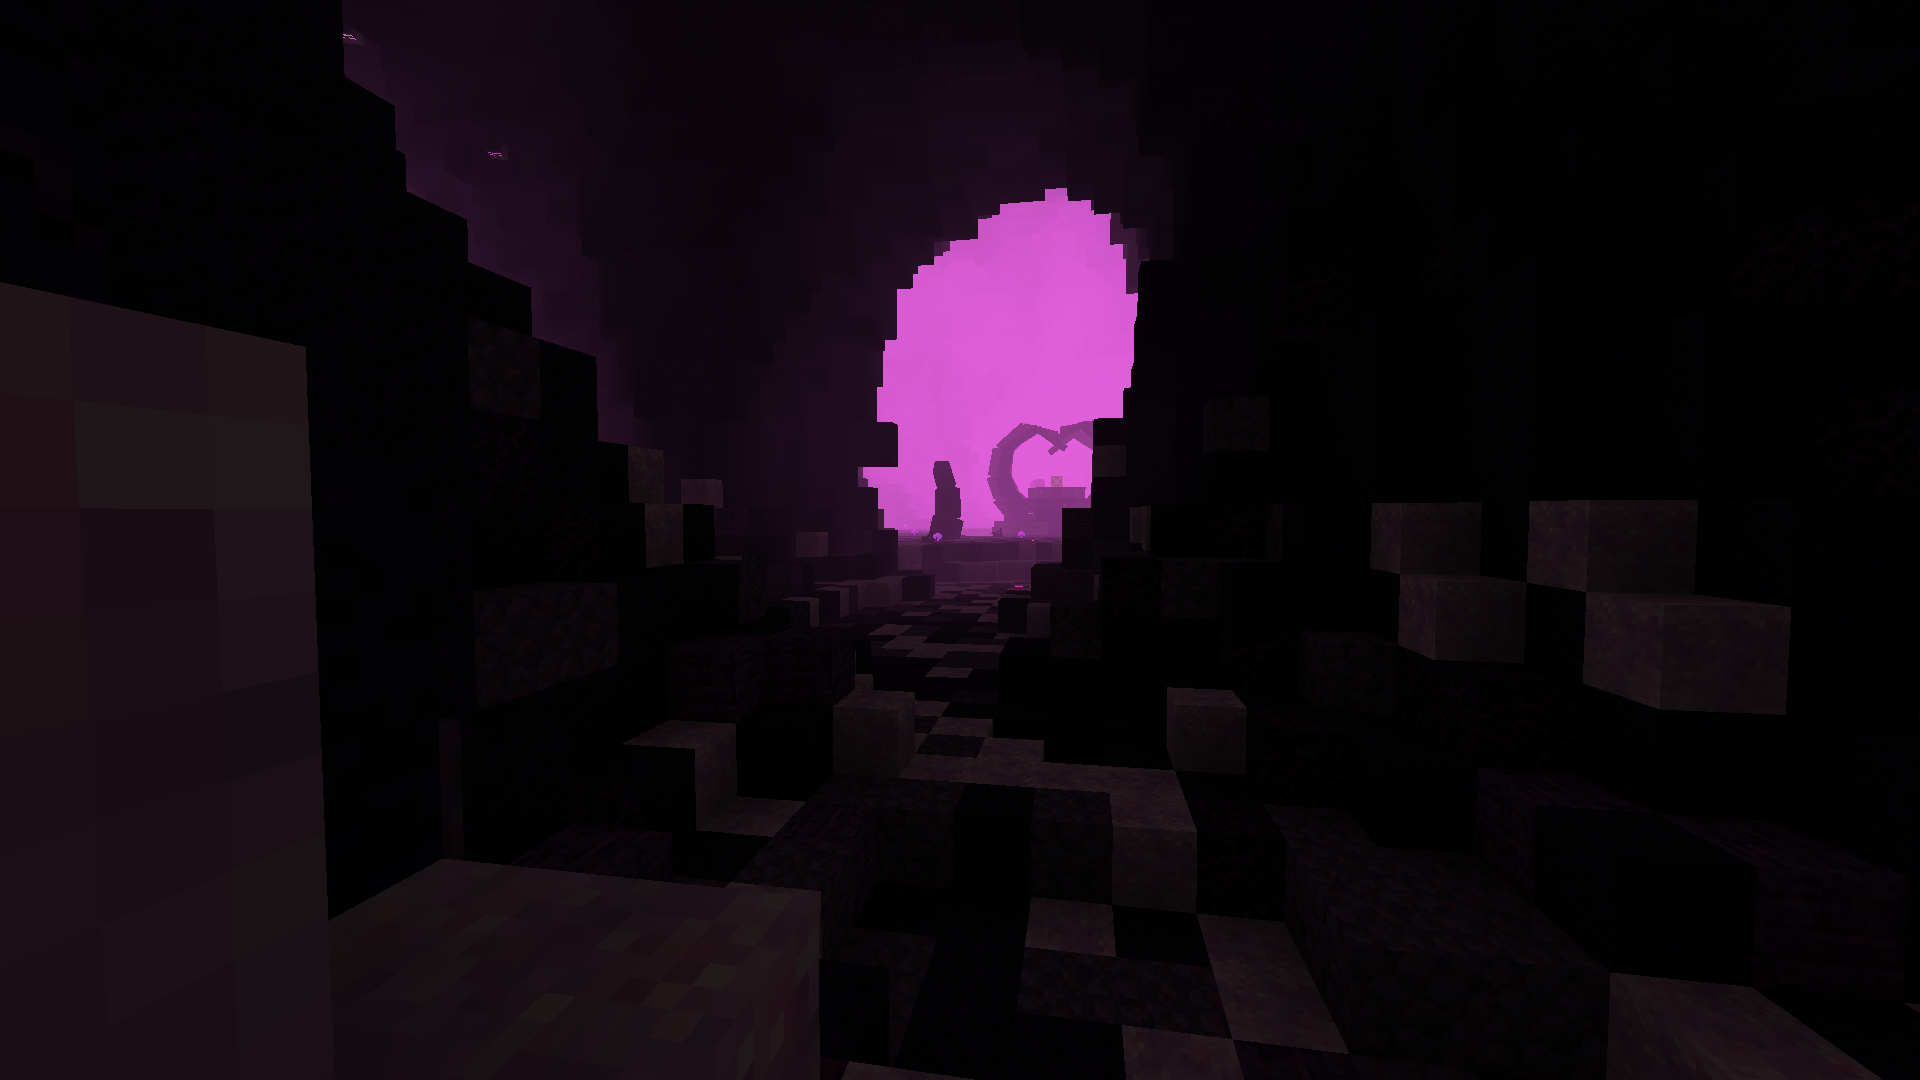 Minecraft story mode wither storm phase 4 - Download Free 3D model by  山丨ㄒ卄乇尺 丂ㄒㄖ尺爪 (@jclaytonmarcillana) [1833b92]